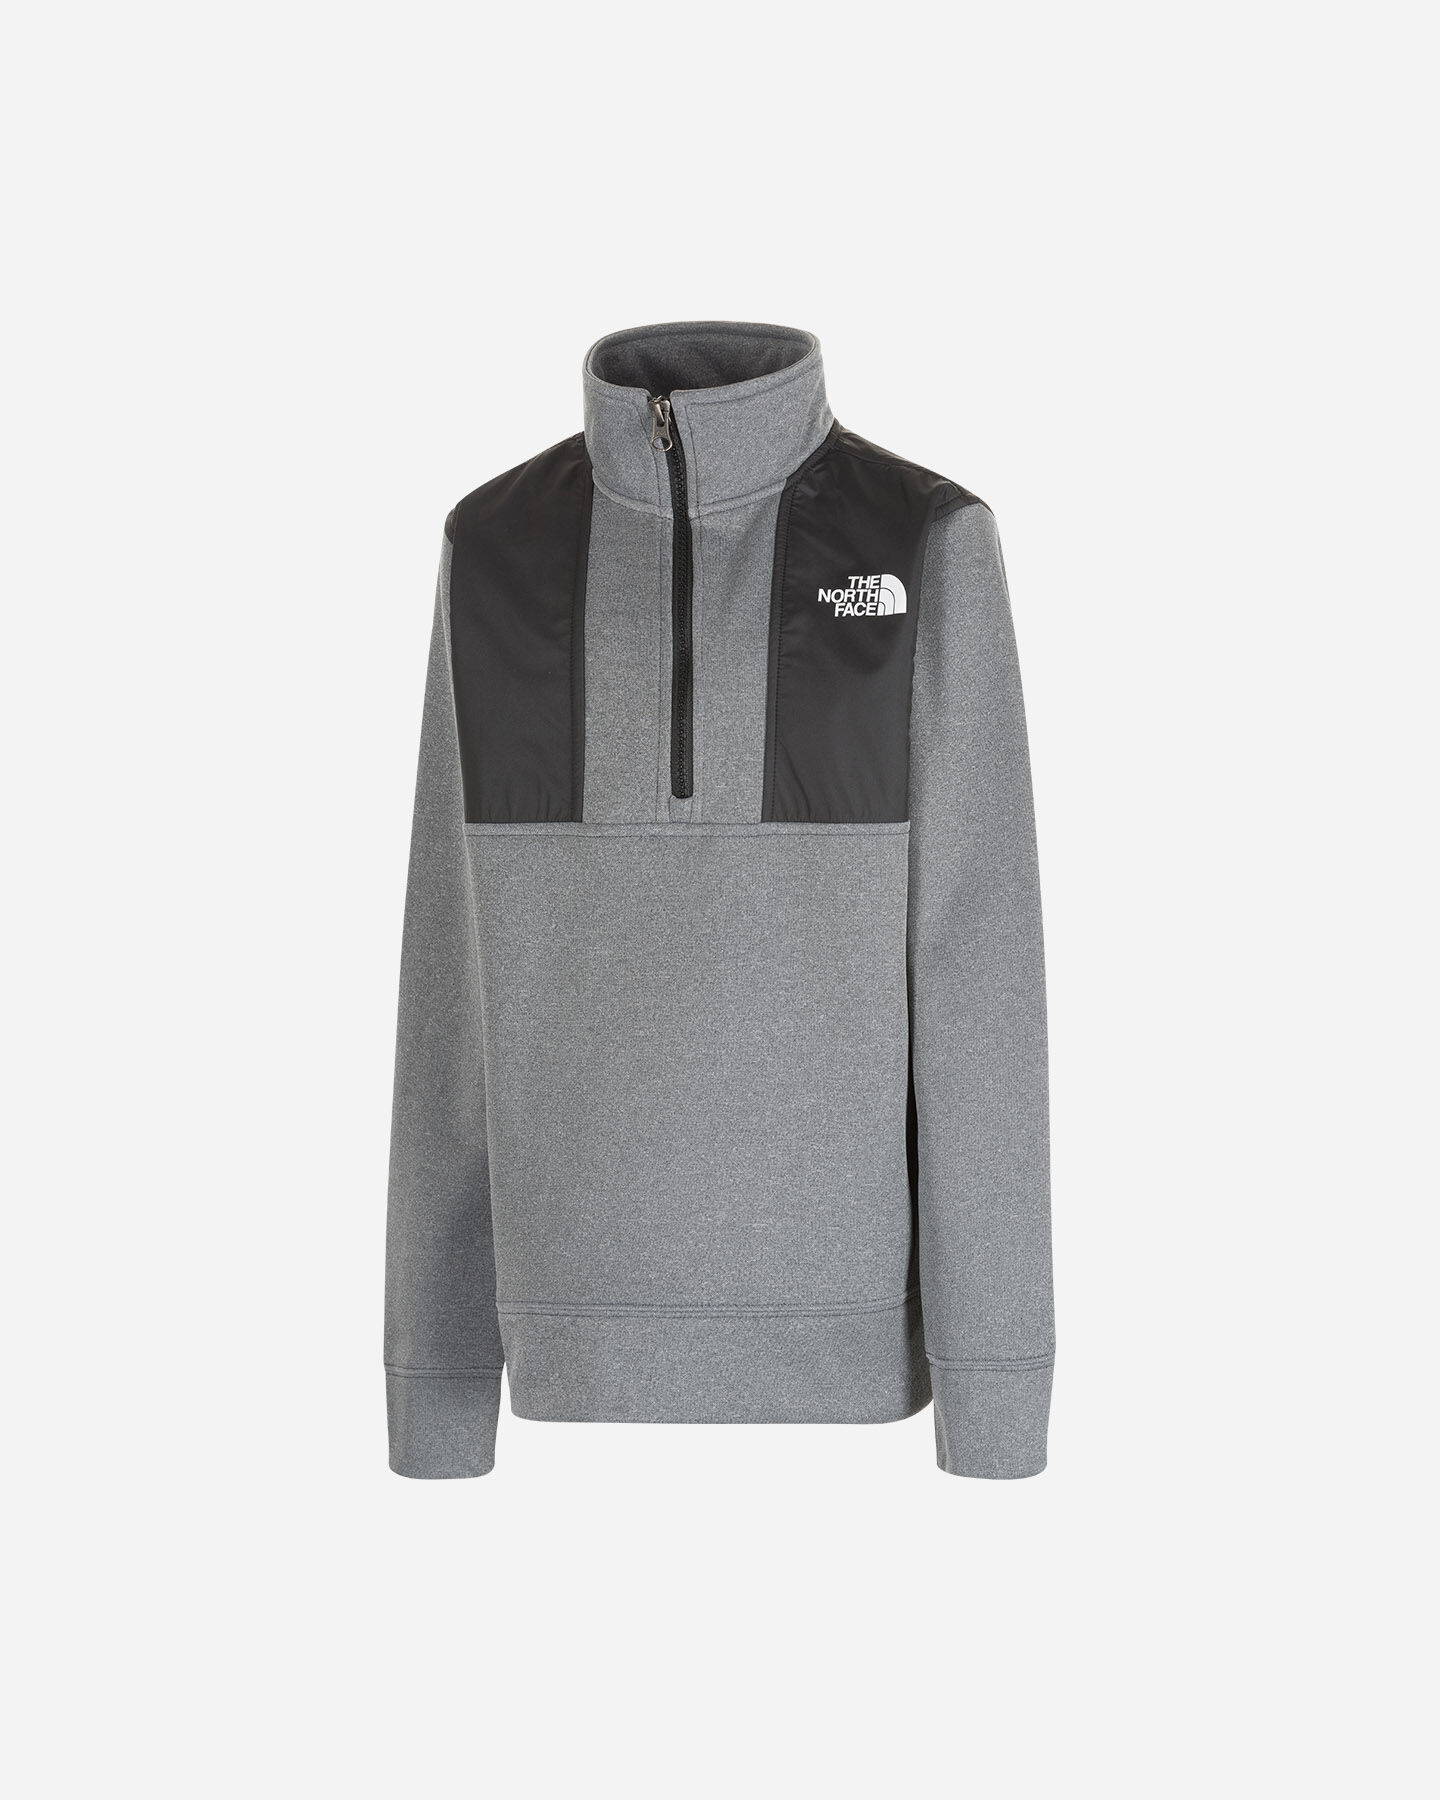  Pile THE NORTH FACE SURGENT JR S5242723|DYY|M scatto 0